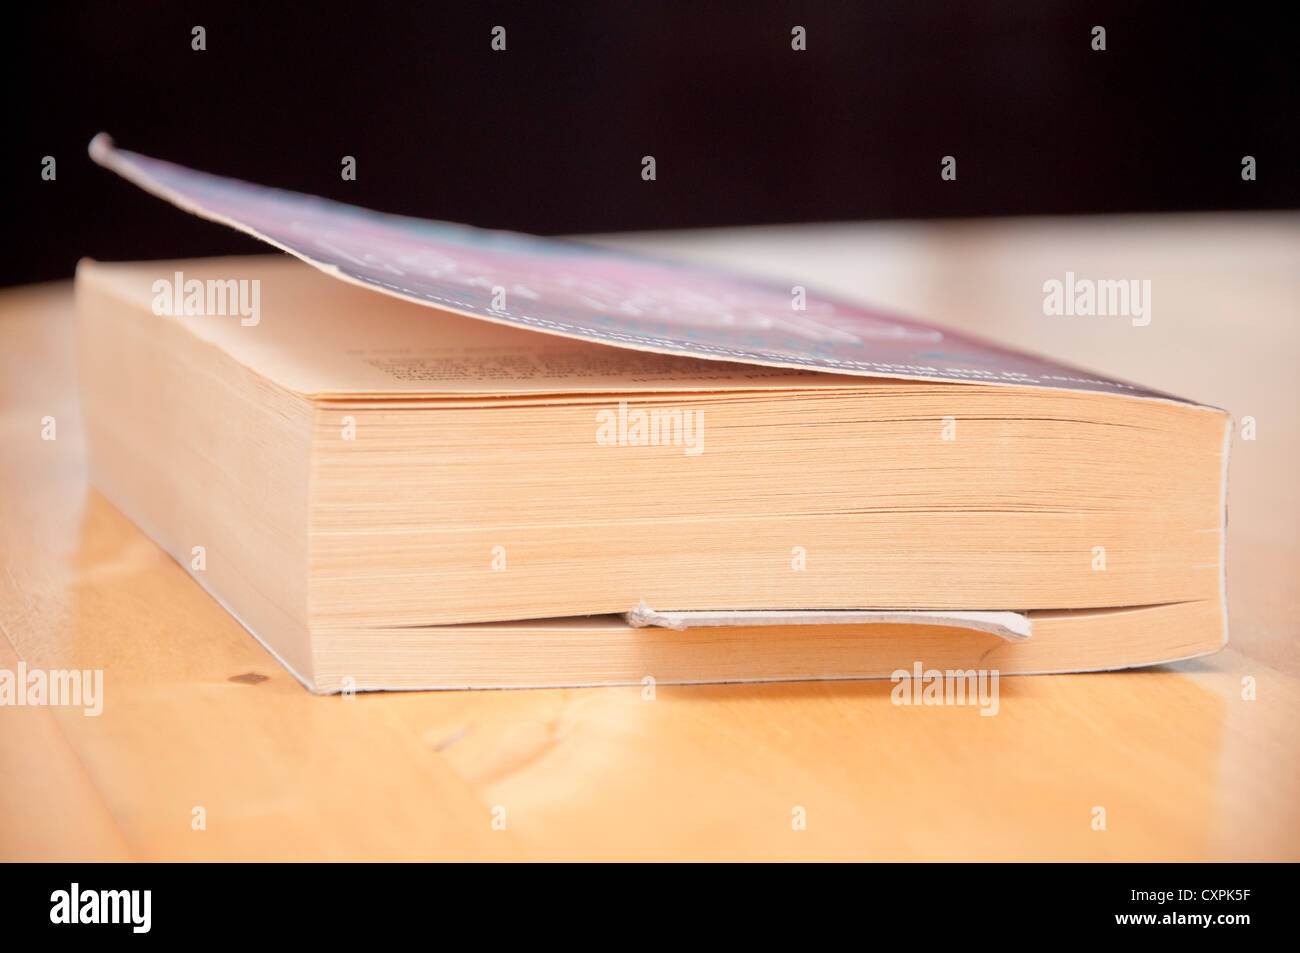 Place in book saved with a scarp of card as a bookmark. Stock Photo